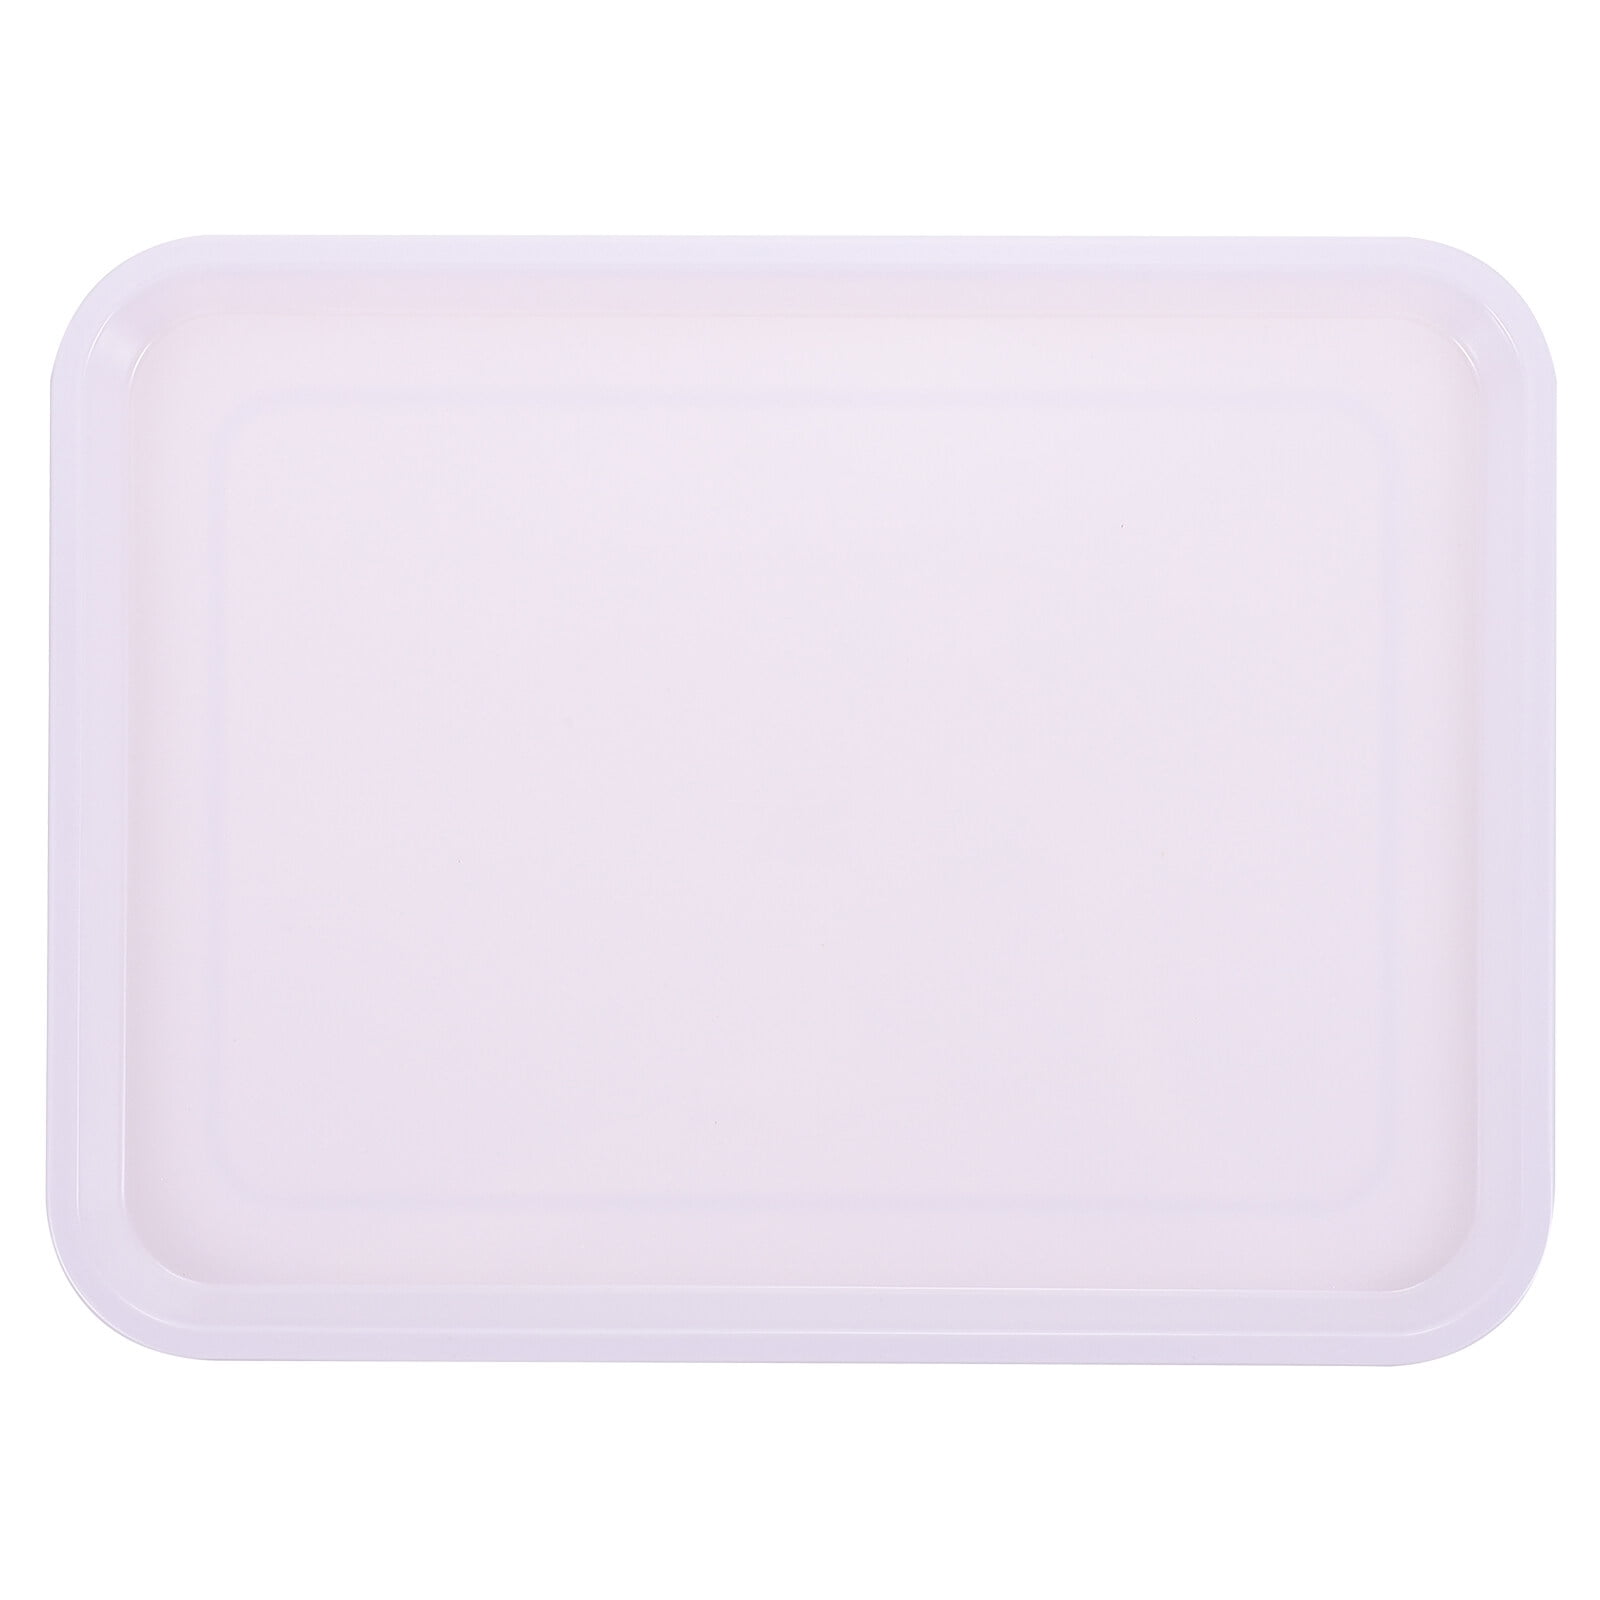 Multipurpose Plastic Tray Durable Serving Tray Practical Storage Container 